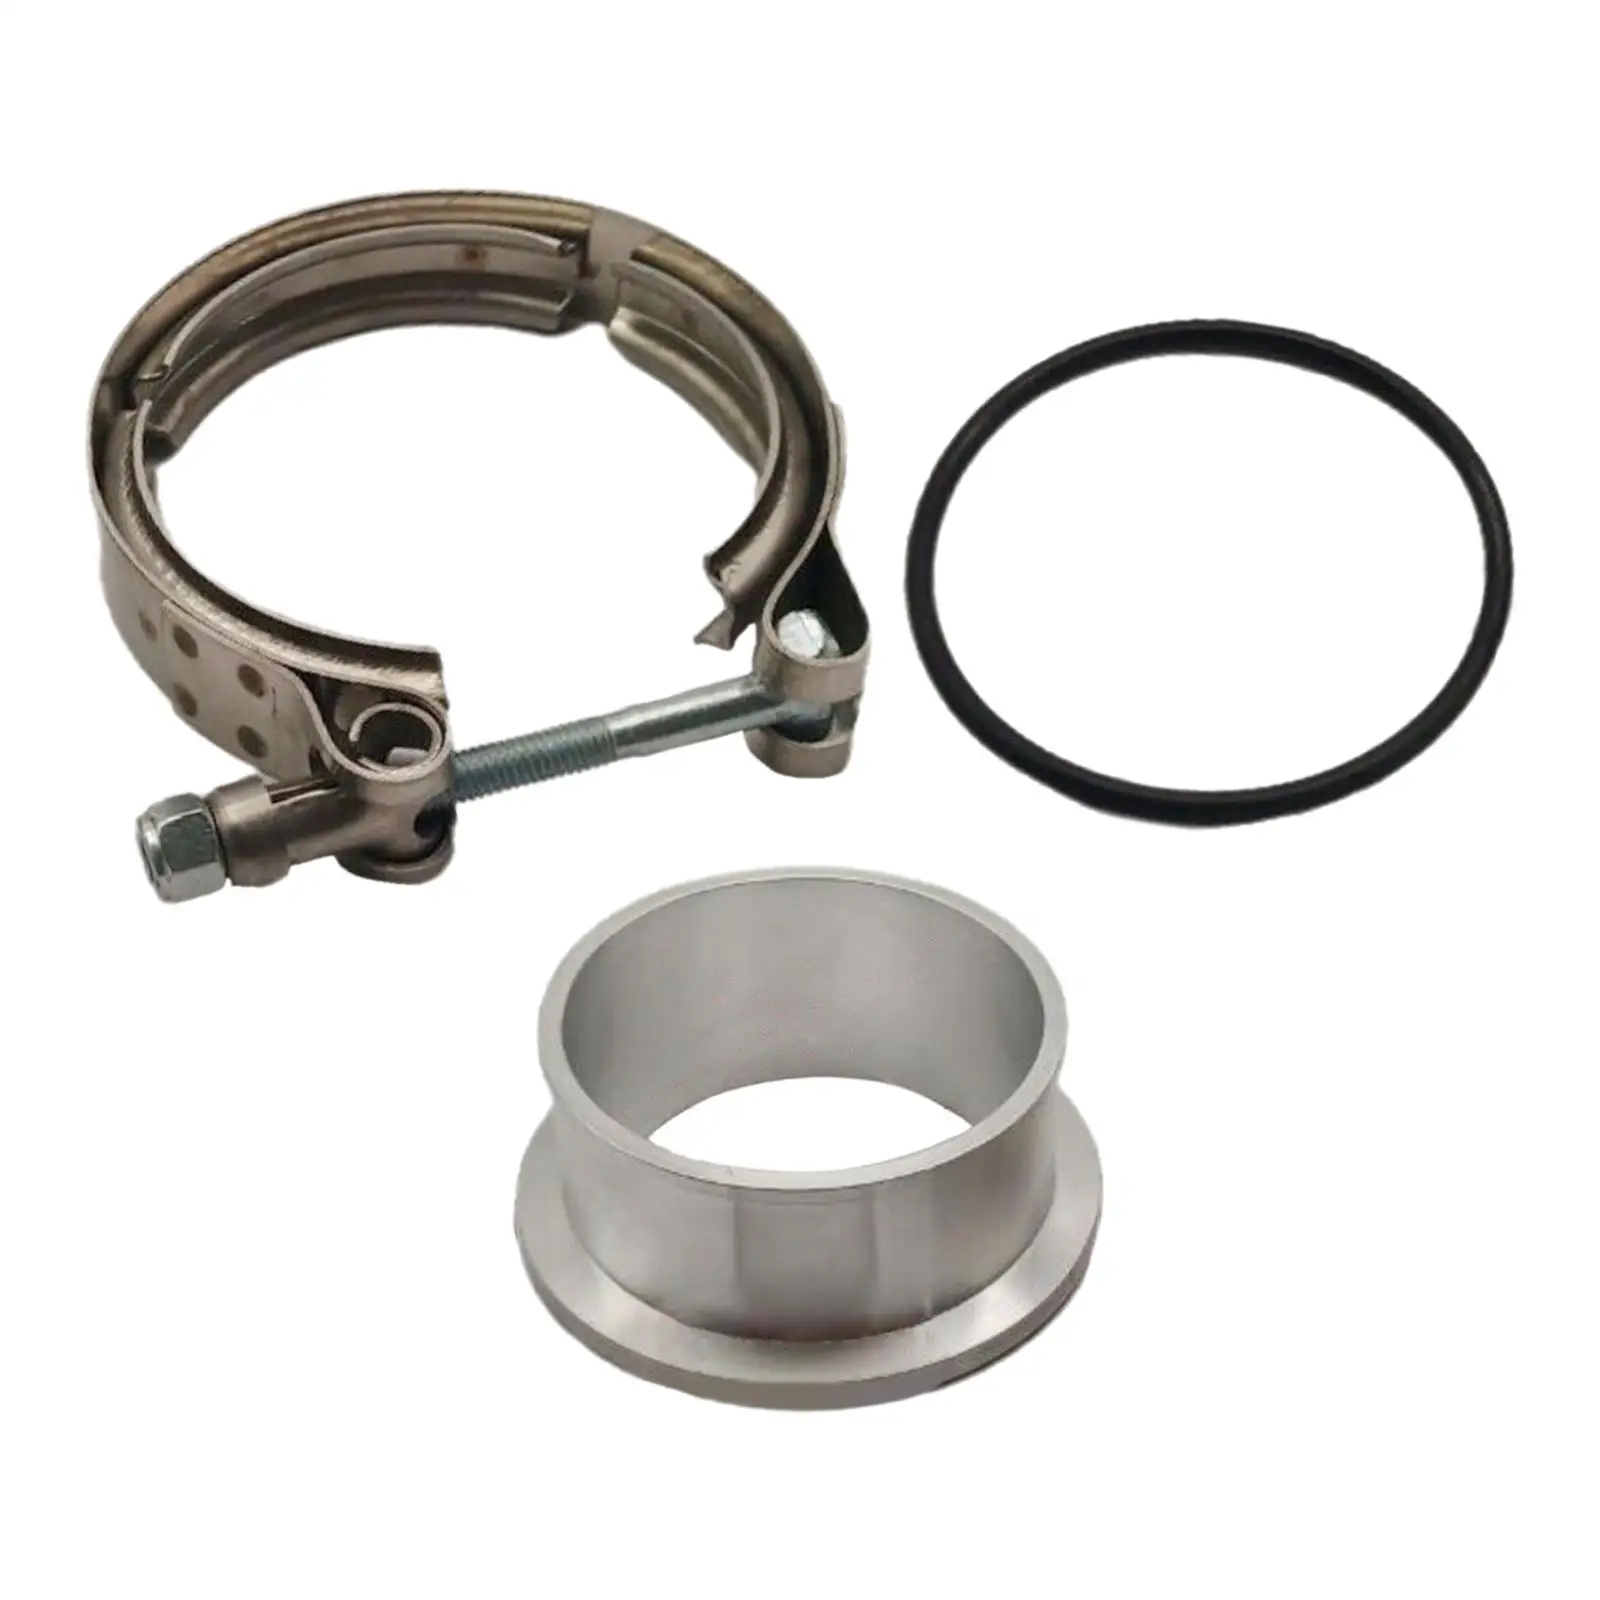 V Band Flange Clamp Excellent Quality Portable Turbo Air Transfer Pipe Clamp for HX35 HX35W HX40W Cummins Replacement Parts